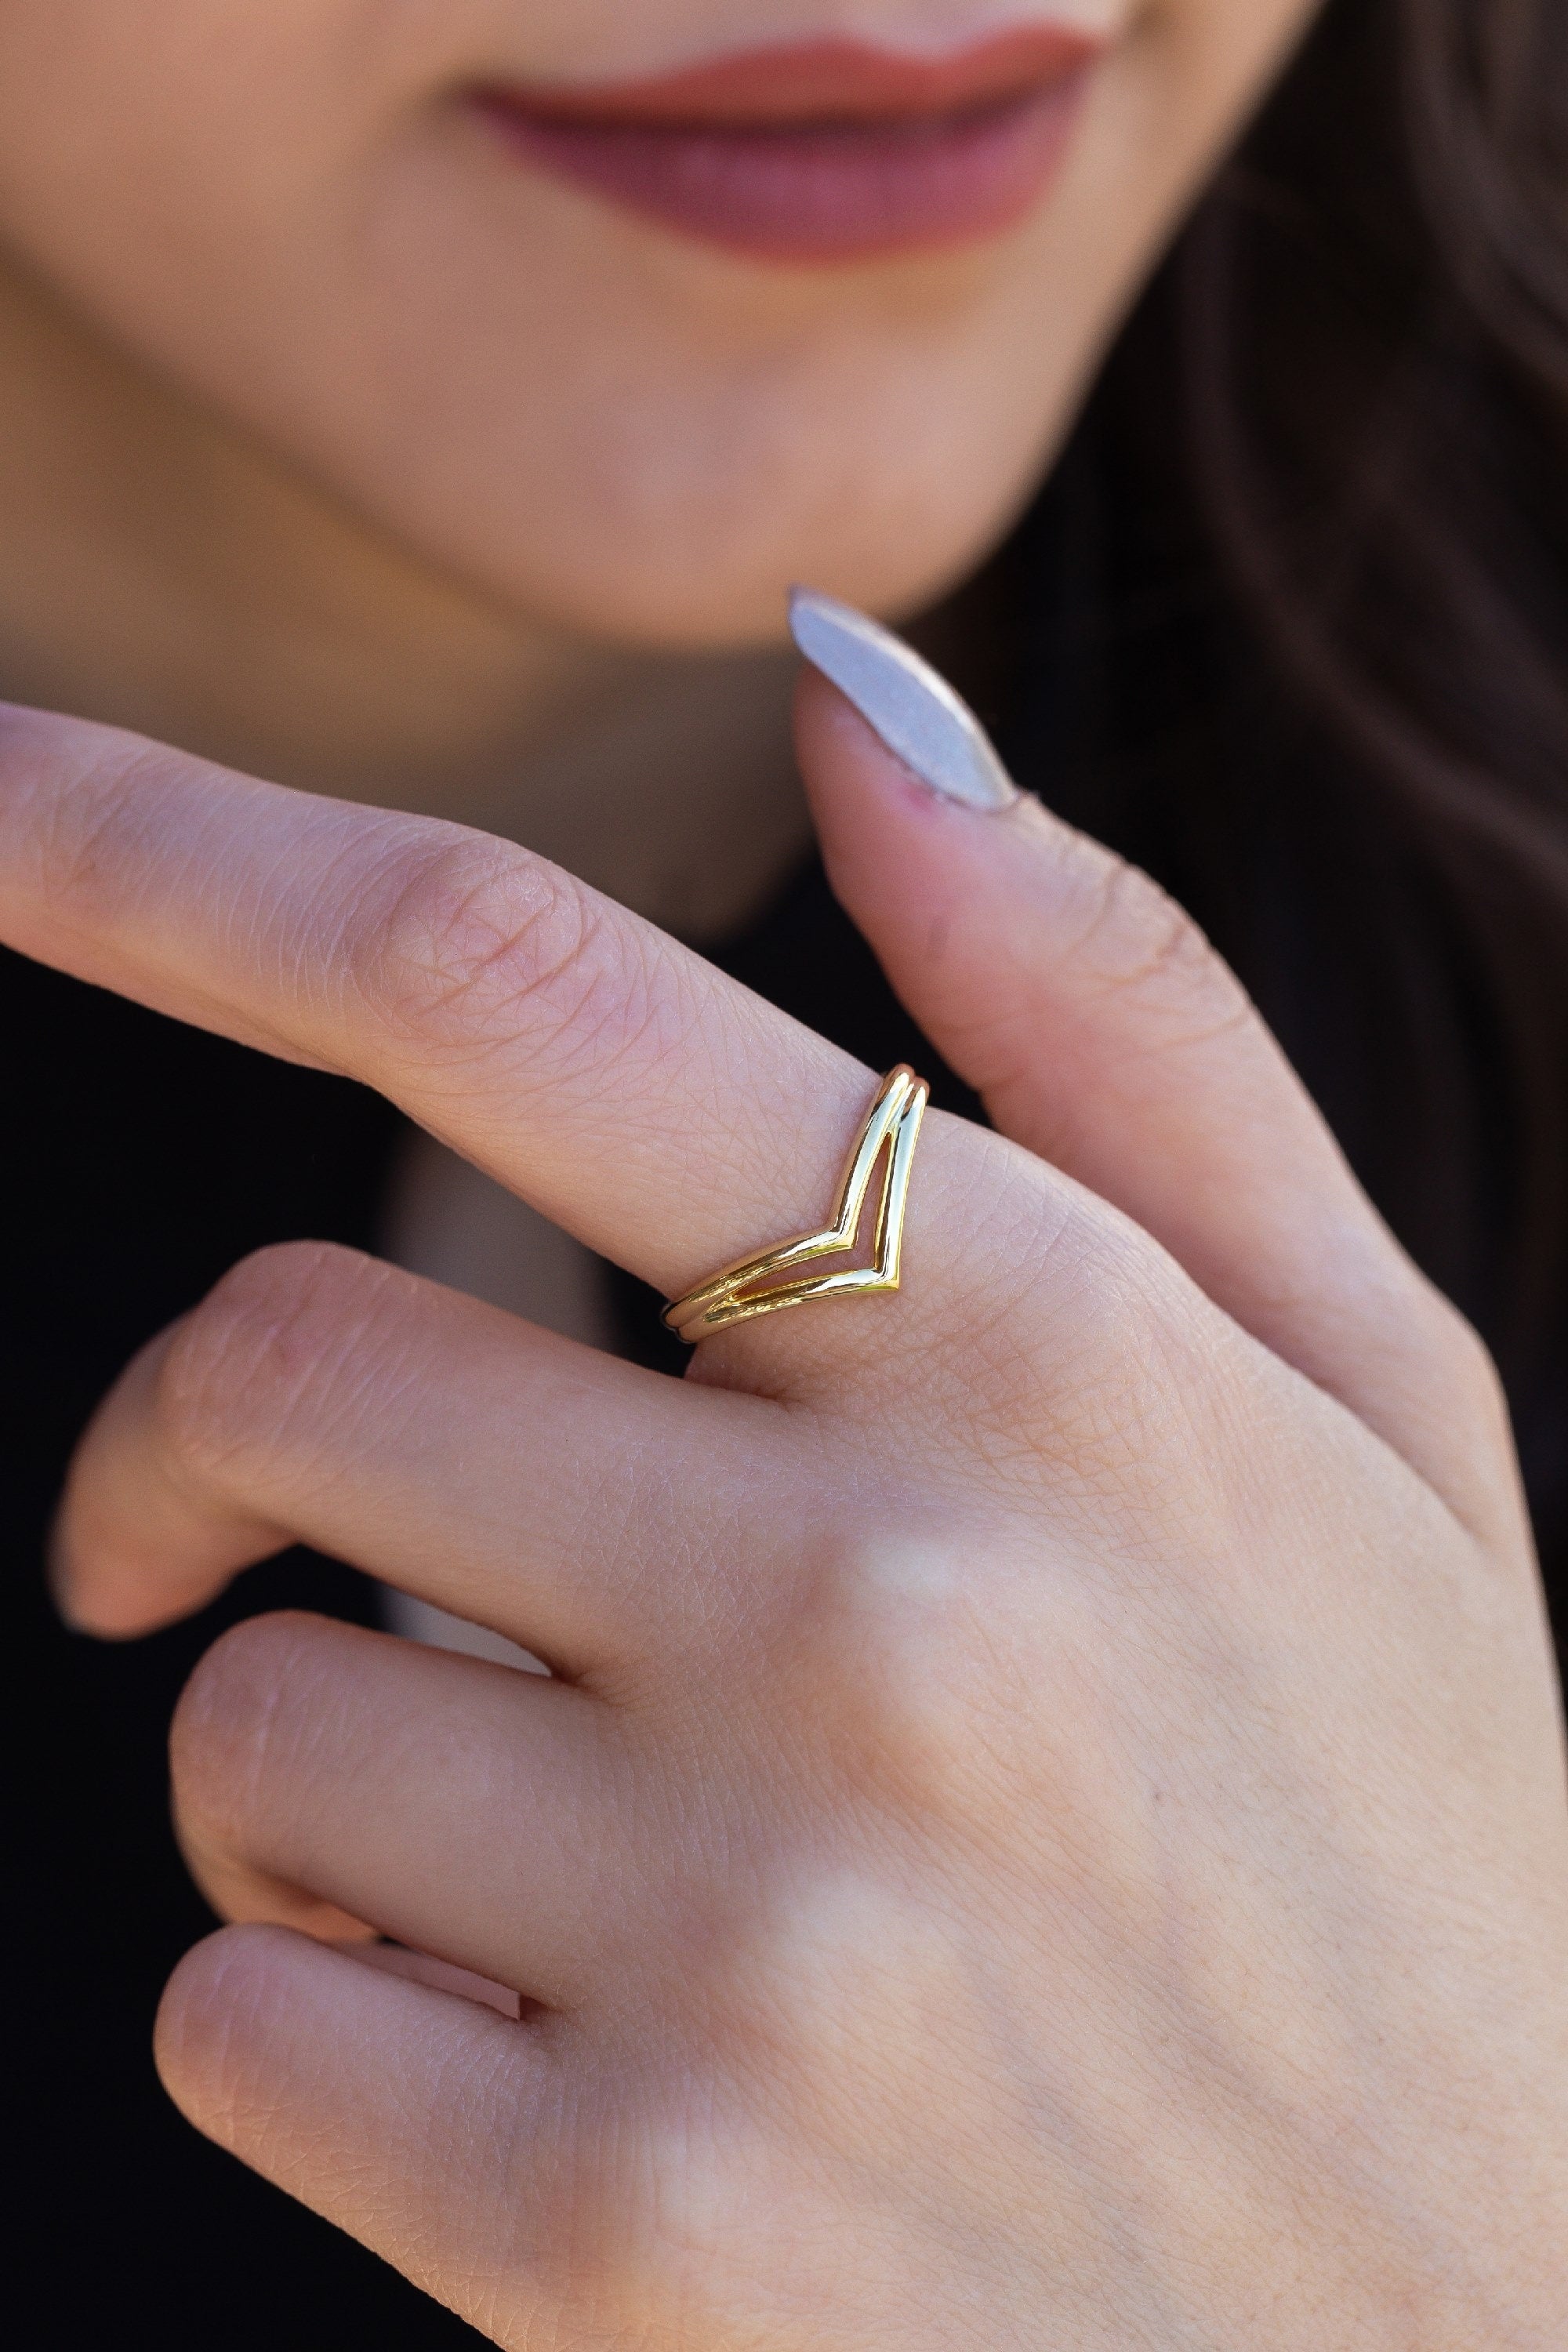 14K Chevron Ring, Gold V-Shaped Ring, Plain Stackable Ring, V Ring, Knuckle Ring, Gift For Mother Day, Mother Day Jewelry, Gift for Her